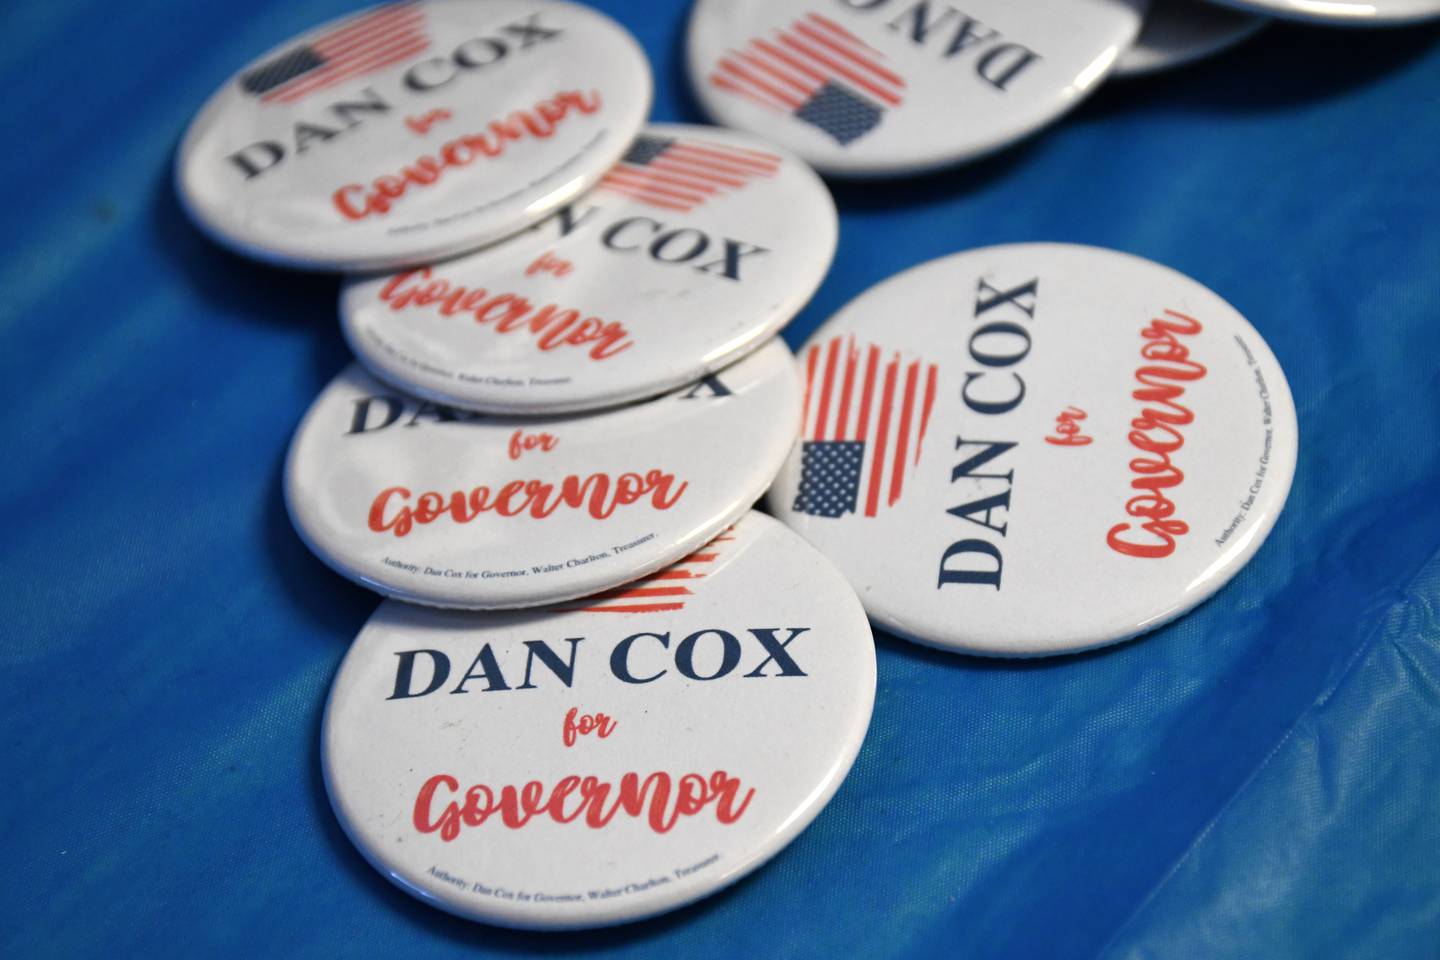 Campaign buttons are set out on a table at a campaign office opening for Dan Cox, the Republican nominee for Maryland governor, in Annapolis on Aug. 15, 2022.